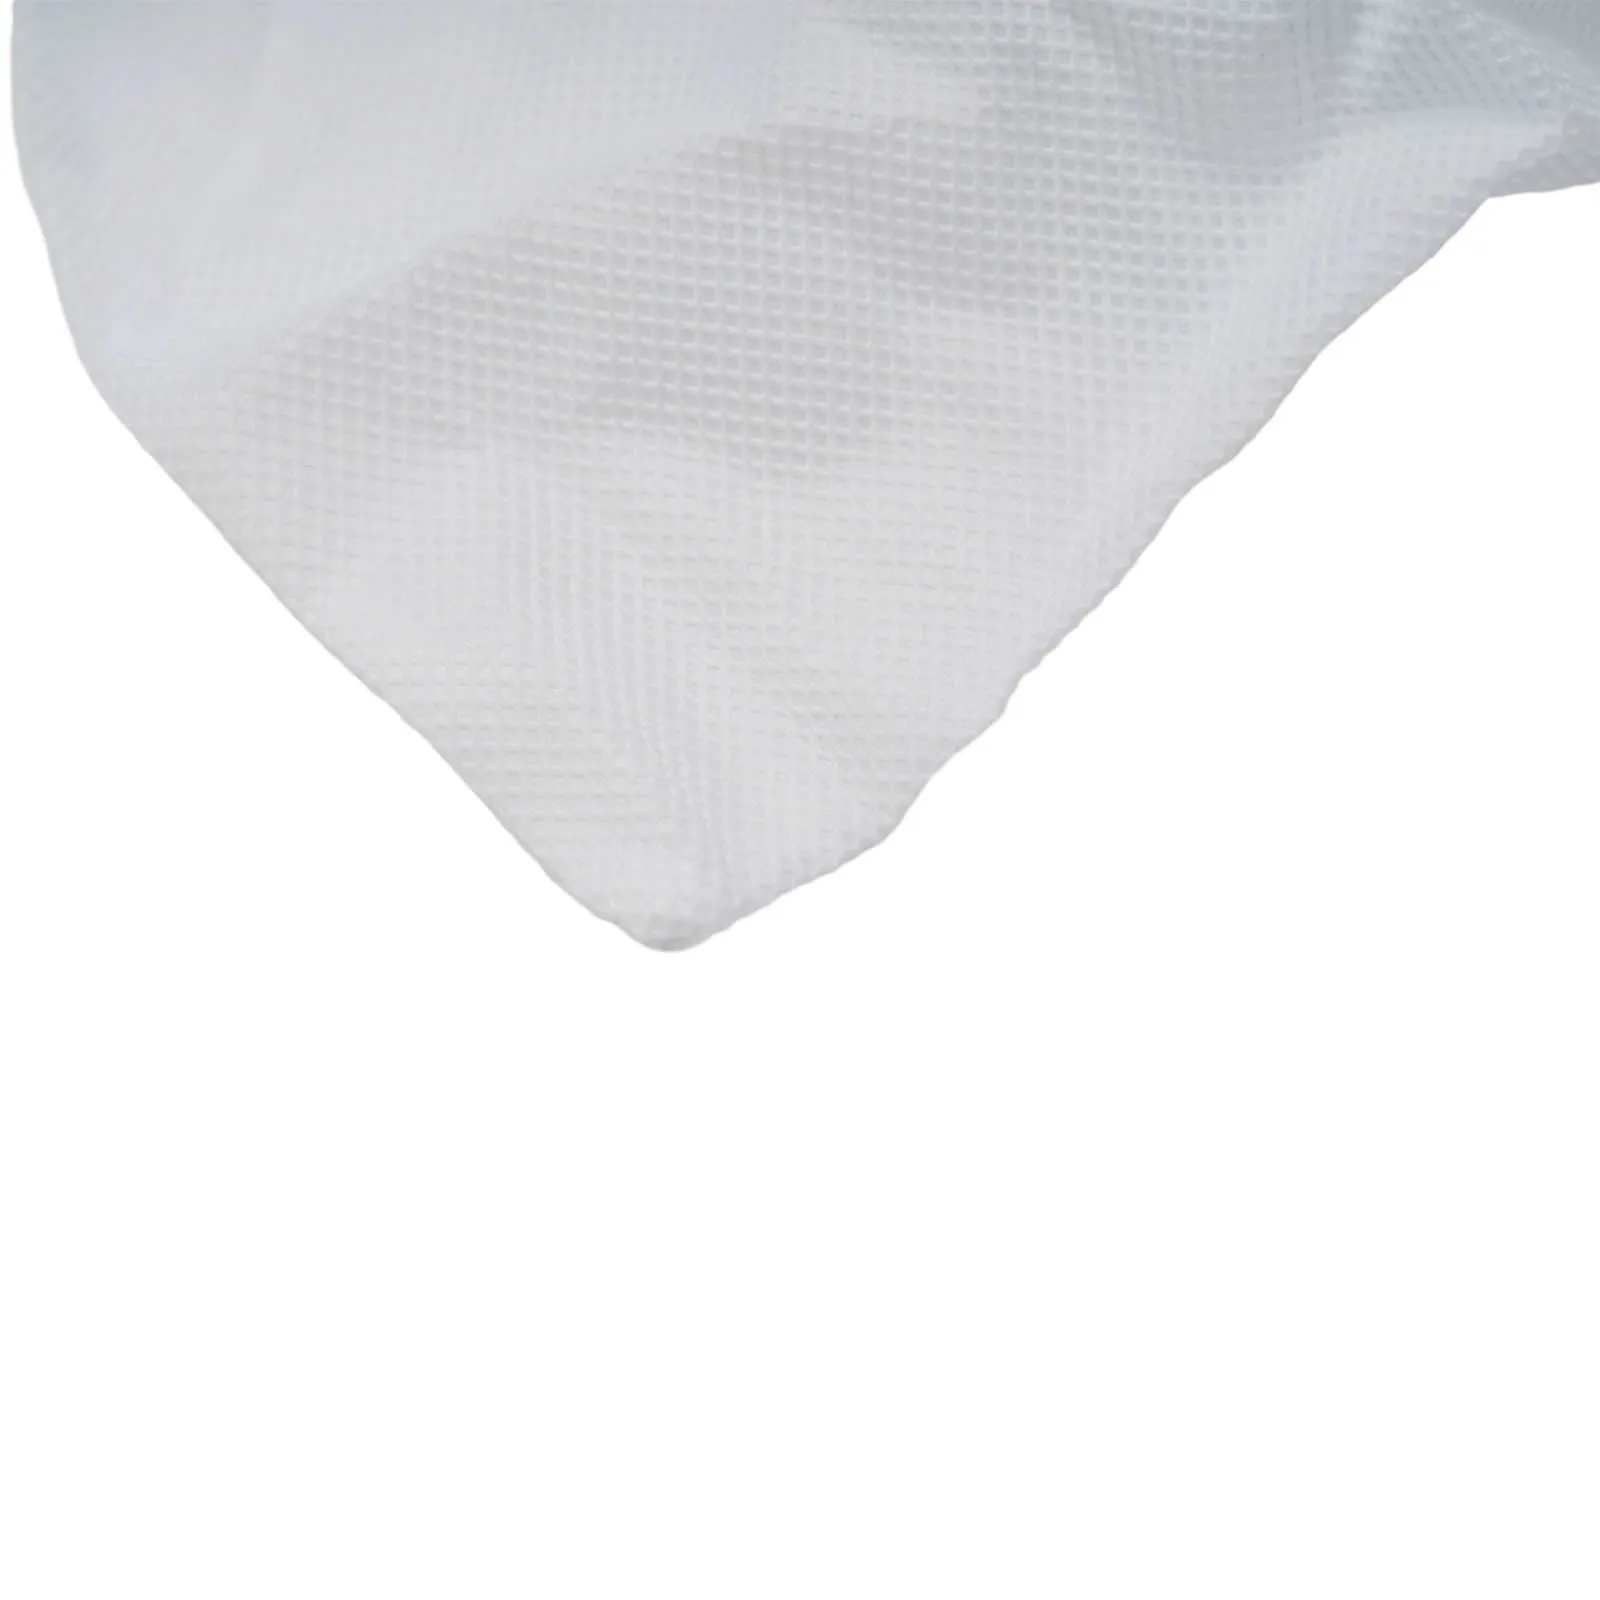 More Durable Practical Washable Brand New Washable Dust Bag Dust Bags 166084-9 For Makita CL100/106/180 DCL180 high quality washable dust bag dust bags 166084 9 cl100 106 180 dcl180 dust bag makita non woven plastic white